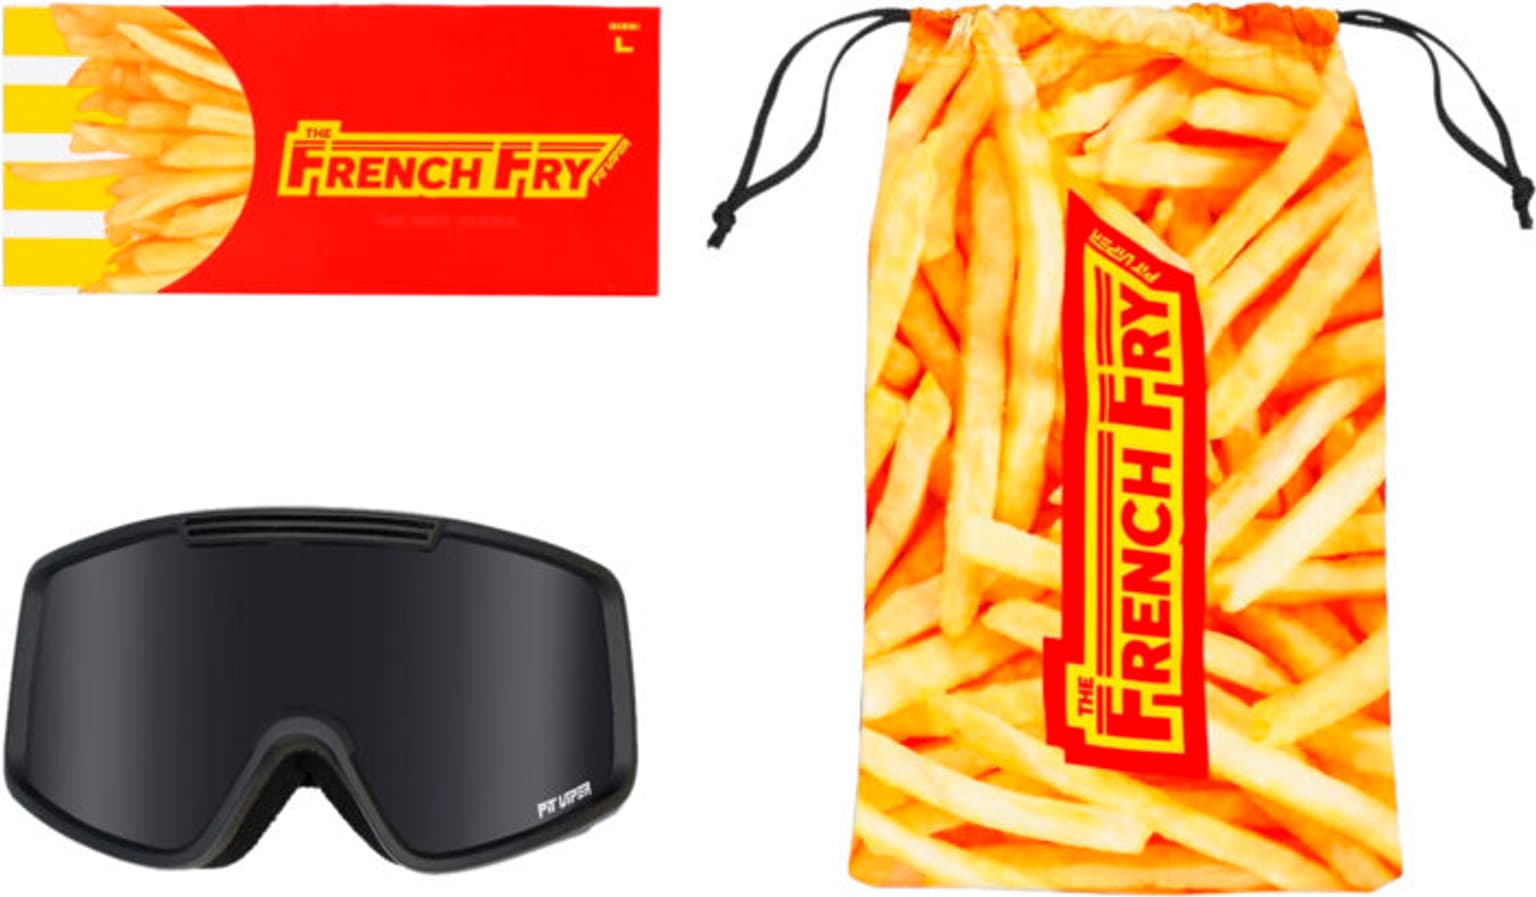 Pit Viper Pit Viper The French Fry Goggle Large The Standard Skibrille 3